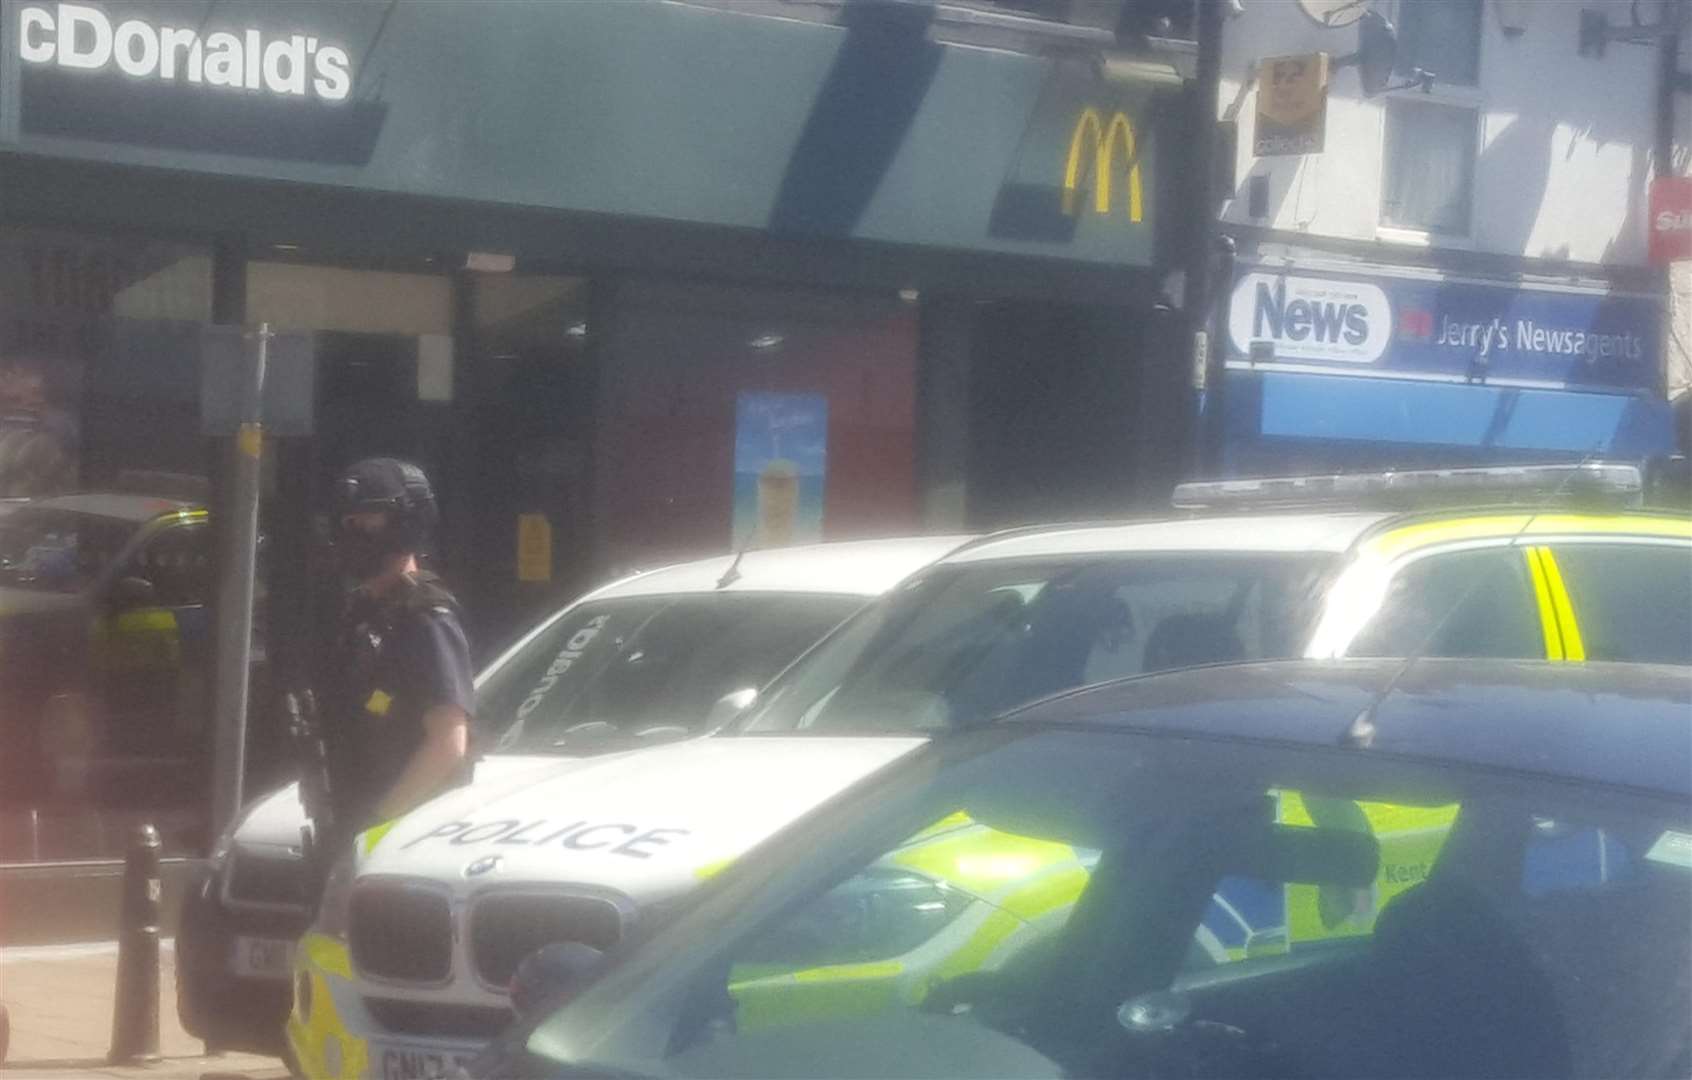 Armed police at the scene. Picture: James Randall